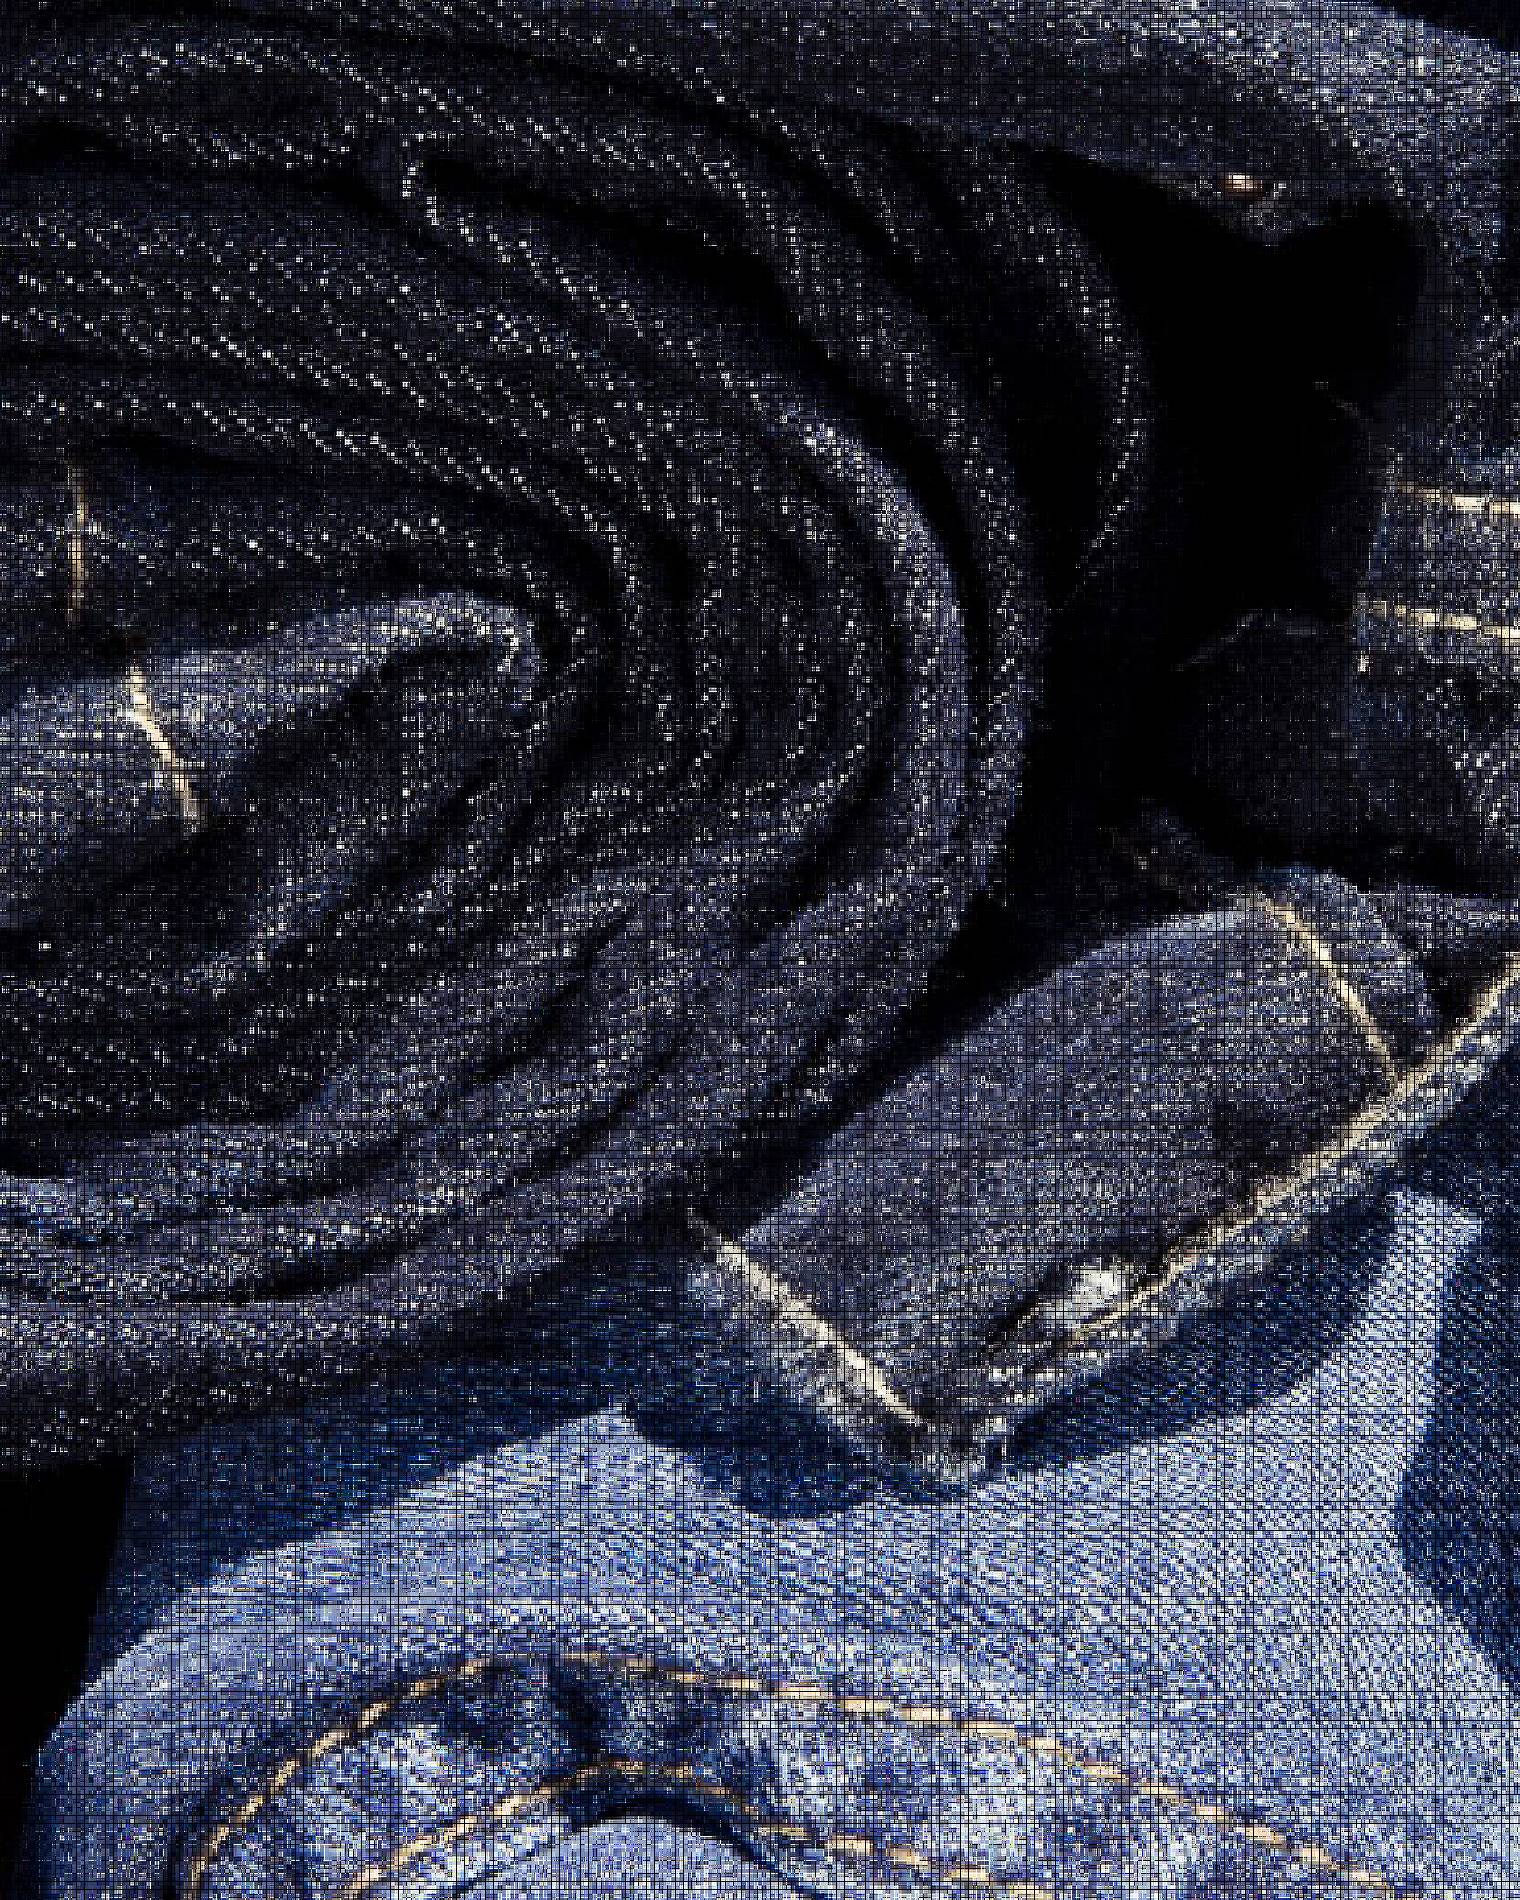 Image of rolled up jeans.